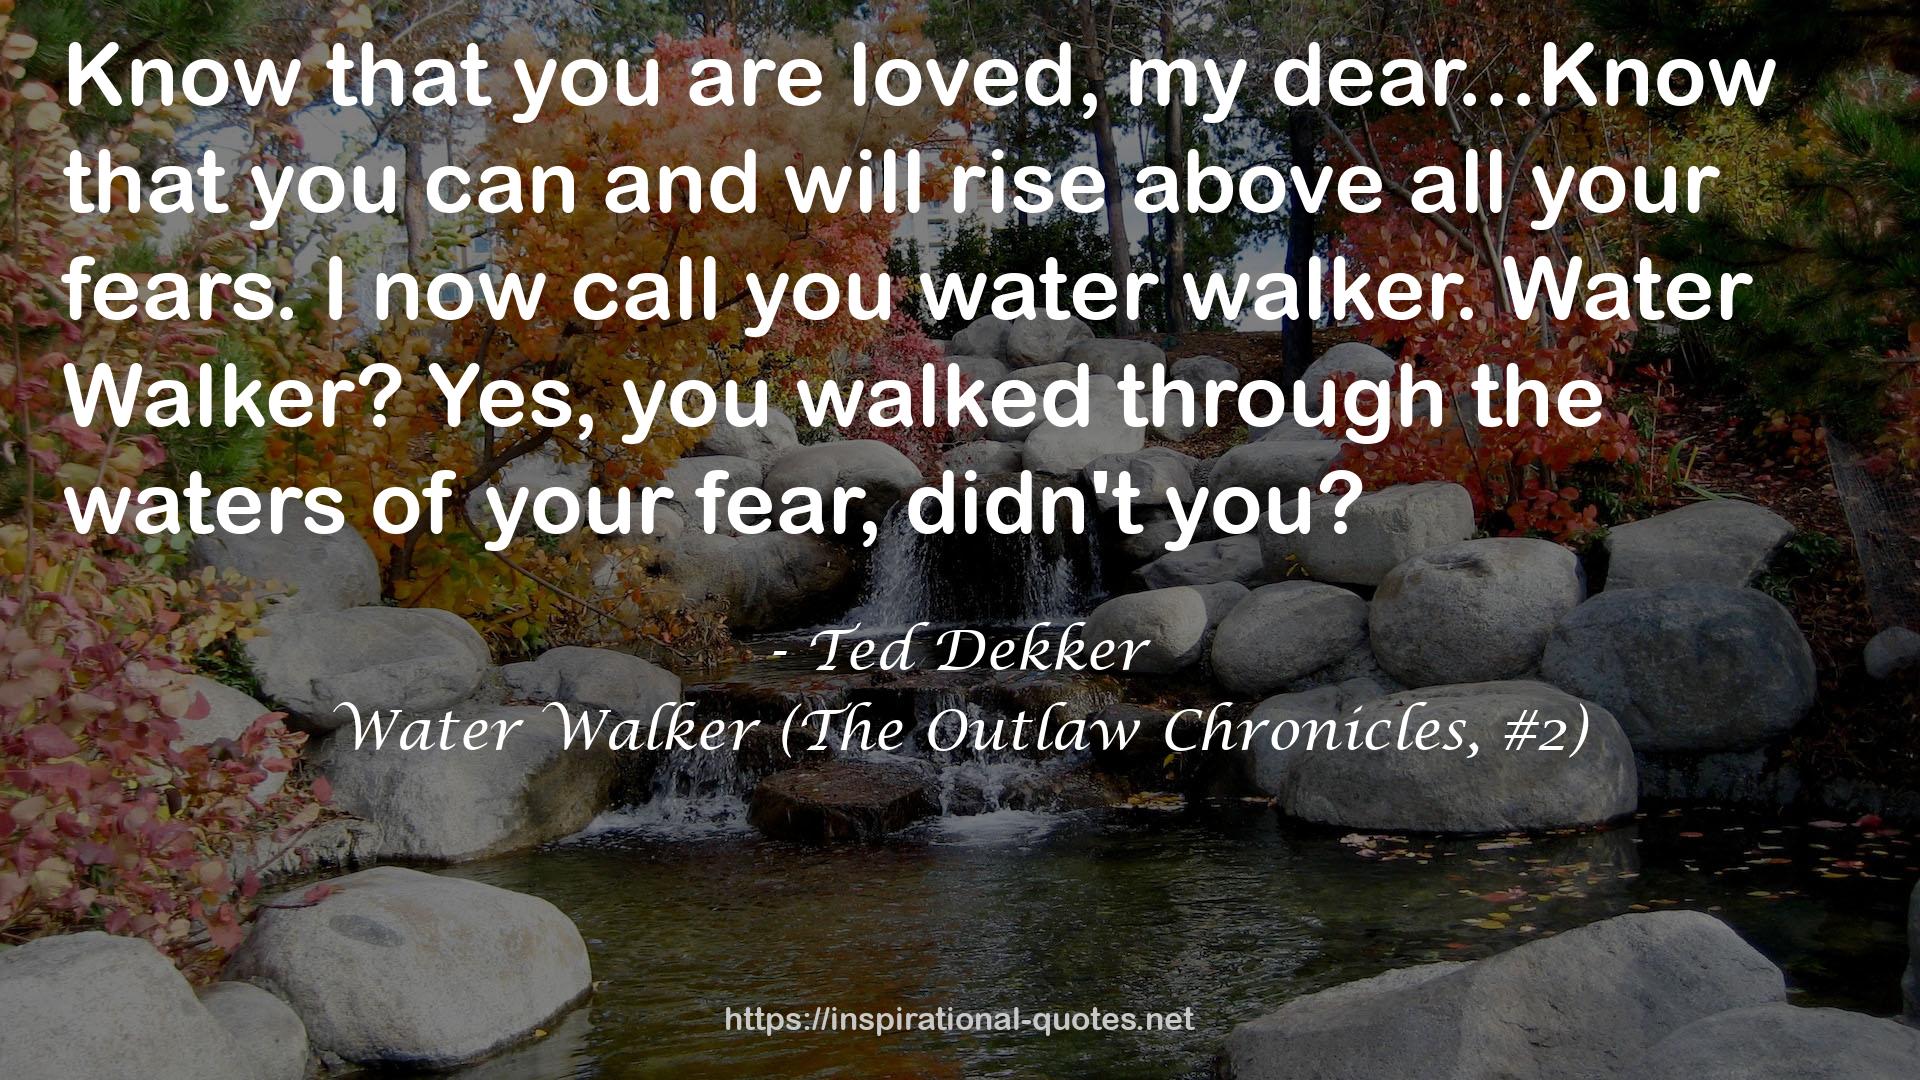 Ted Dekker QUOTES